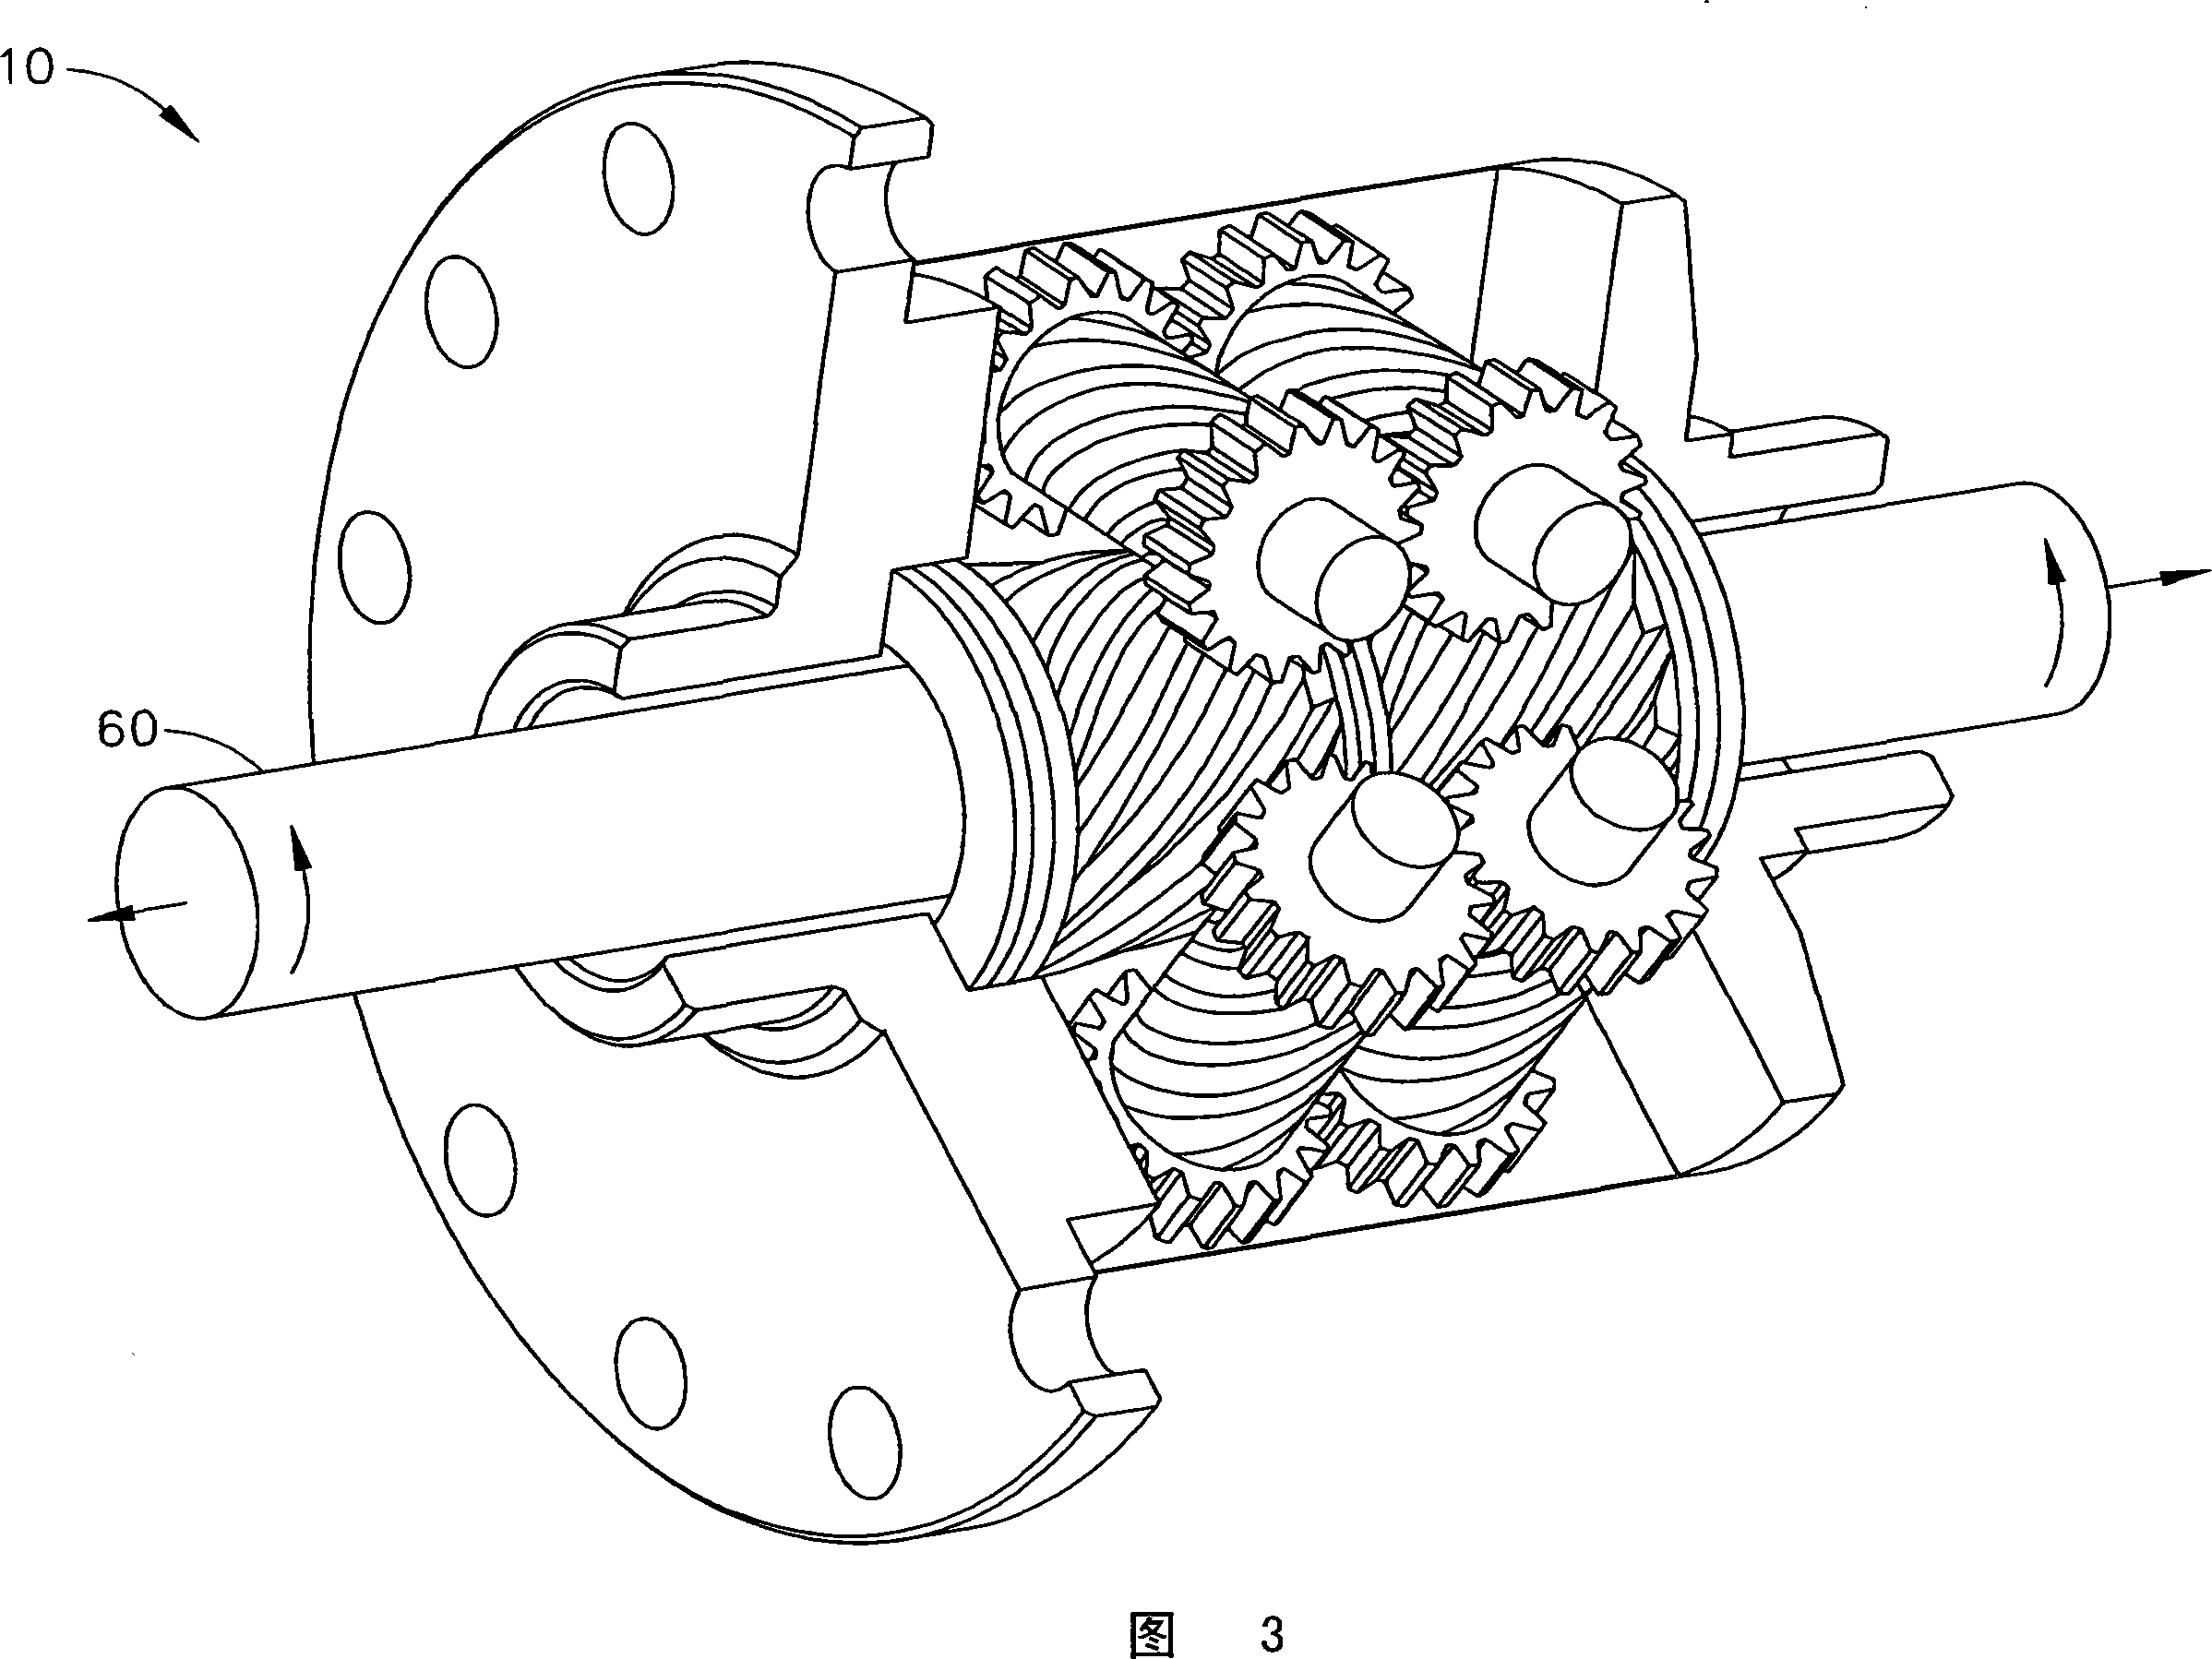 Variable coupling of high pressure rotor and low pressure rotor of turbofan engine